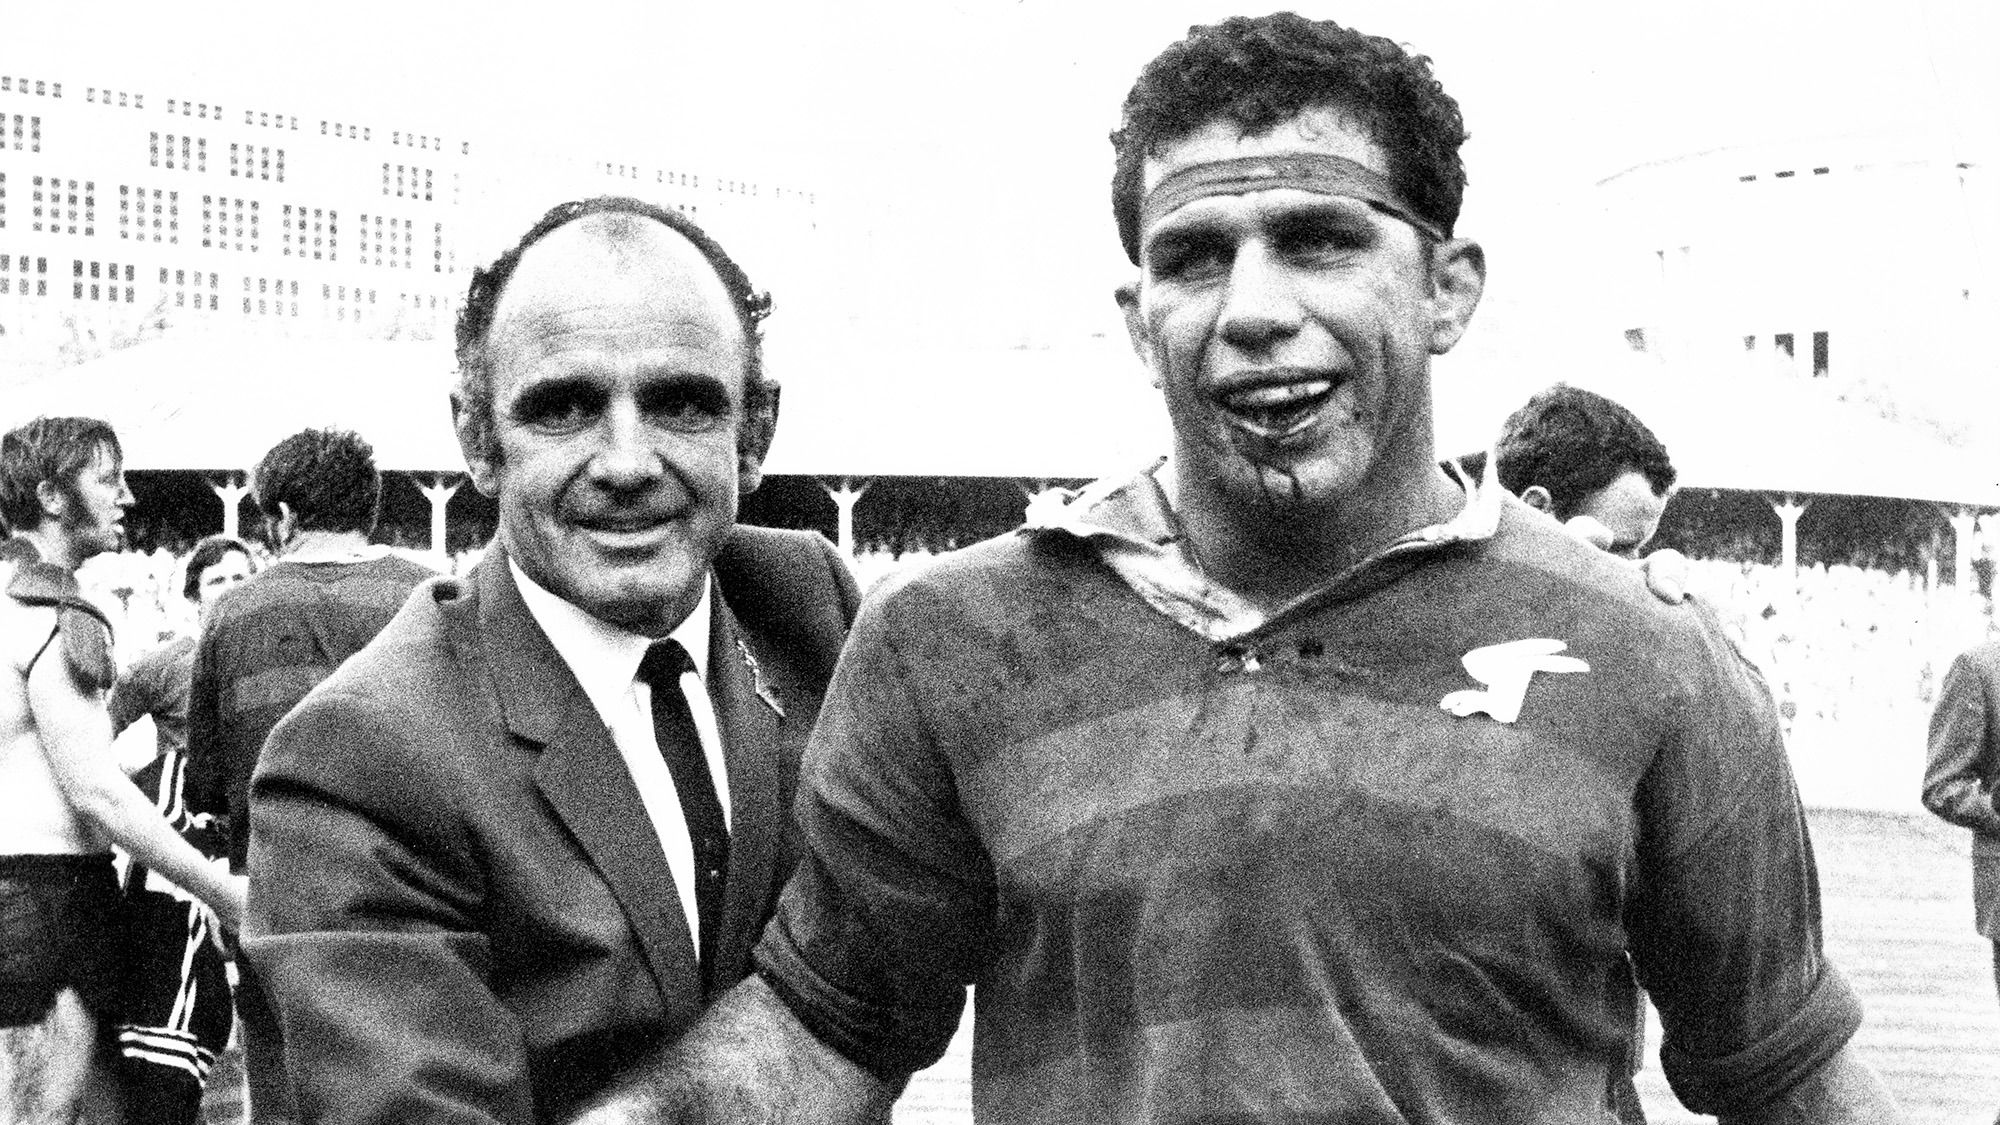 Rugby league icon John Sattler, famous for courageous grand final act, dies, aged 80